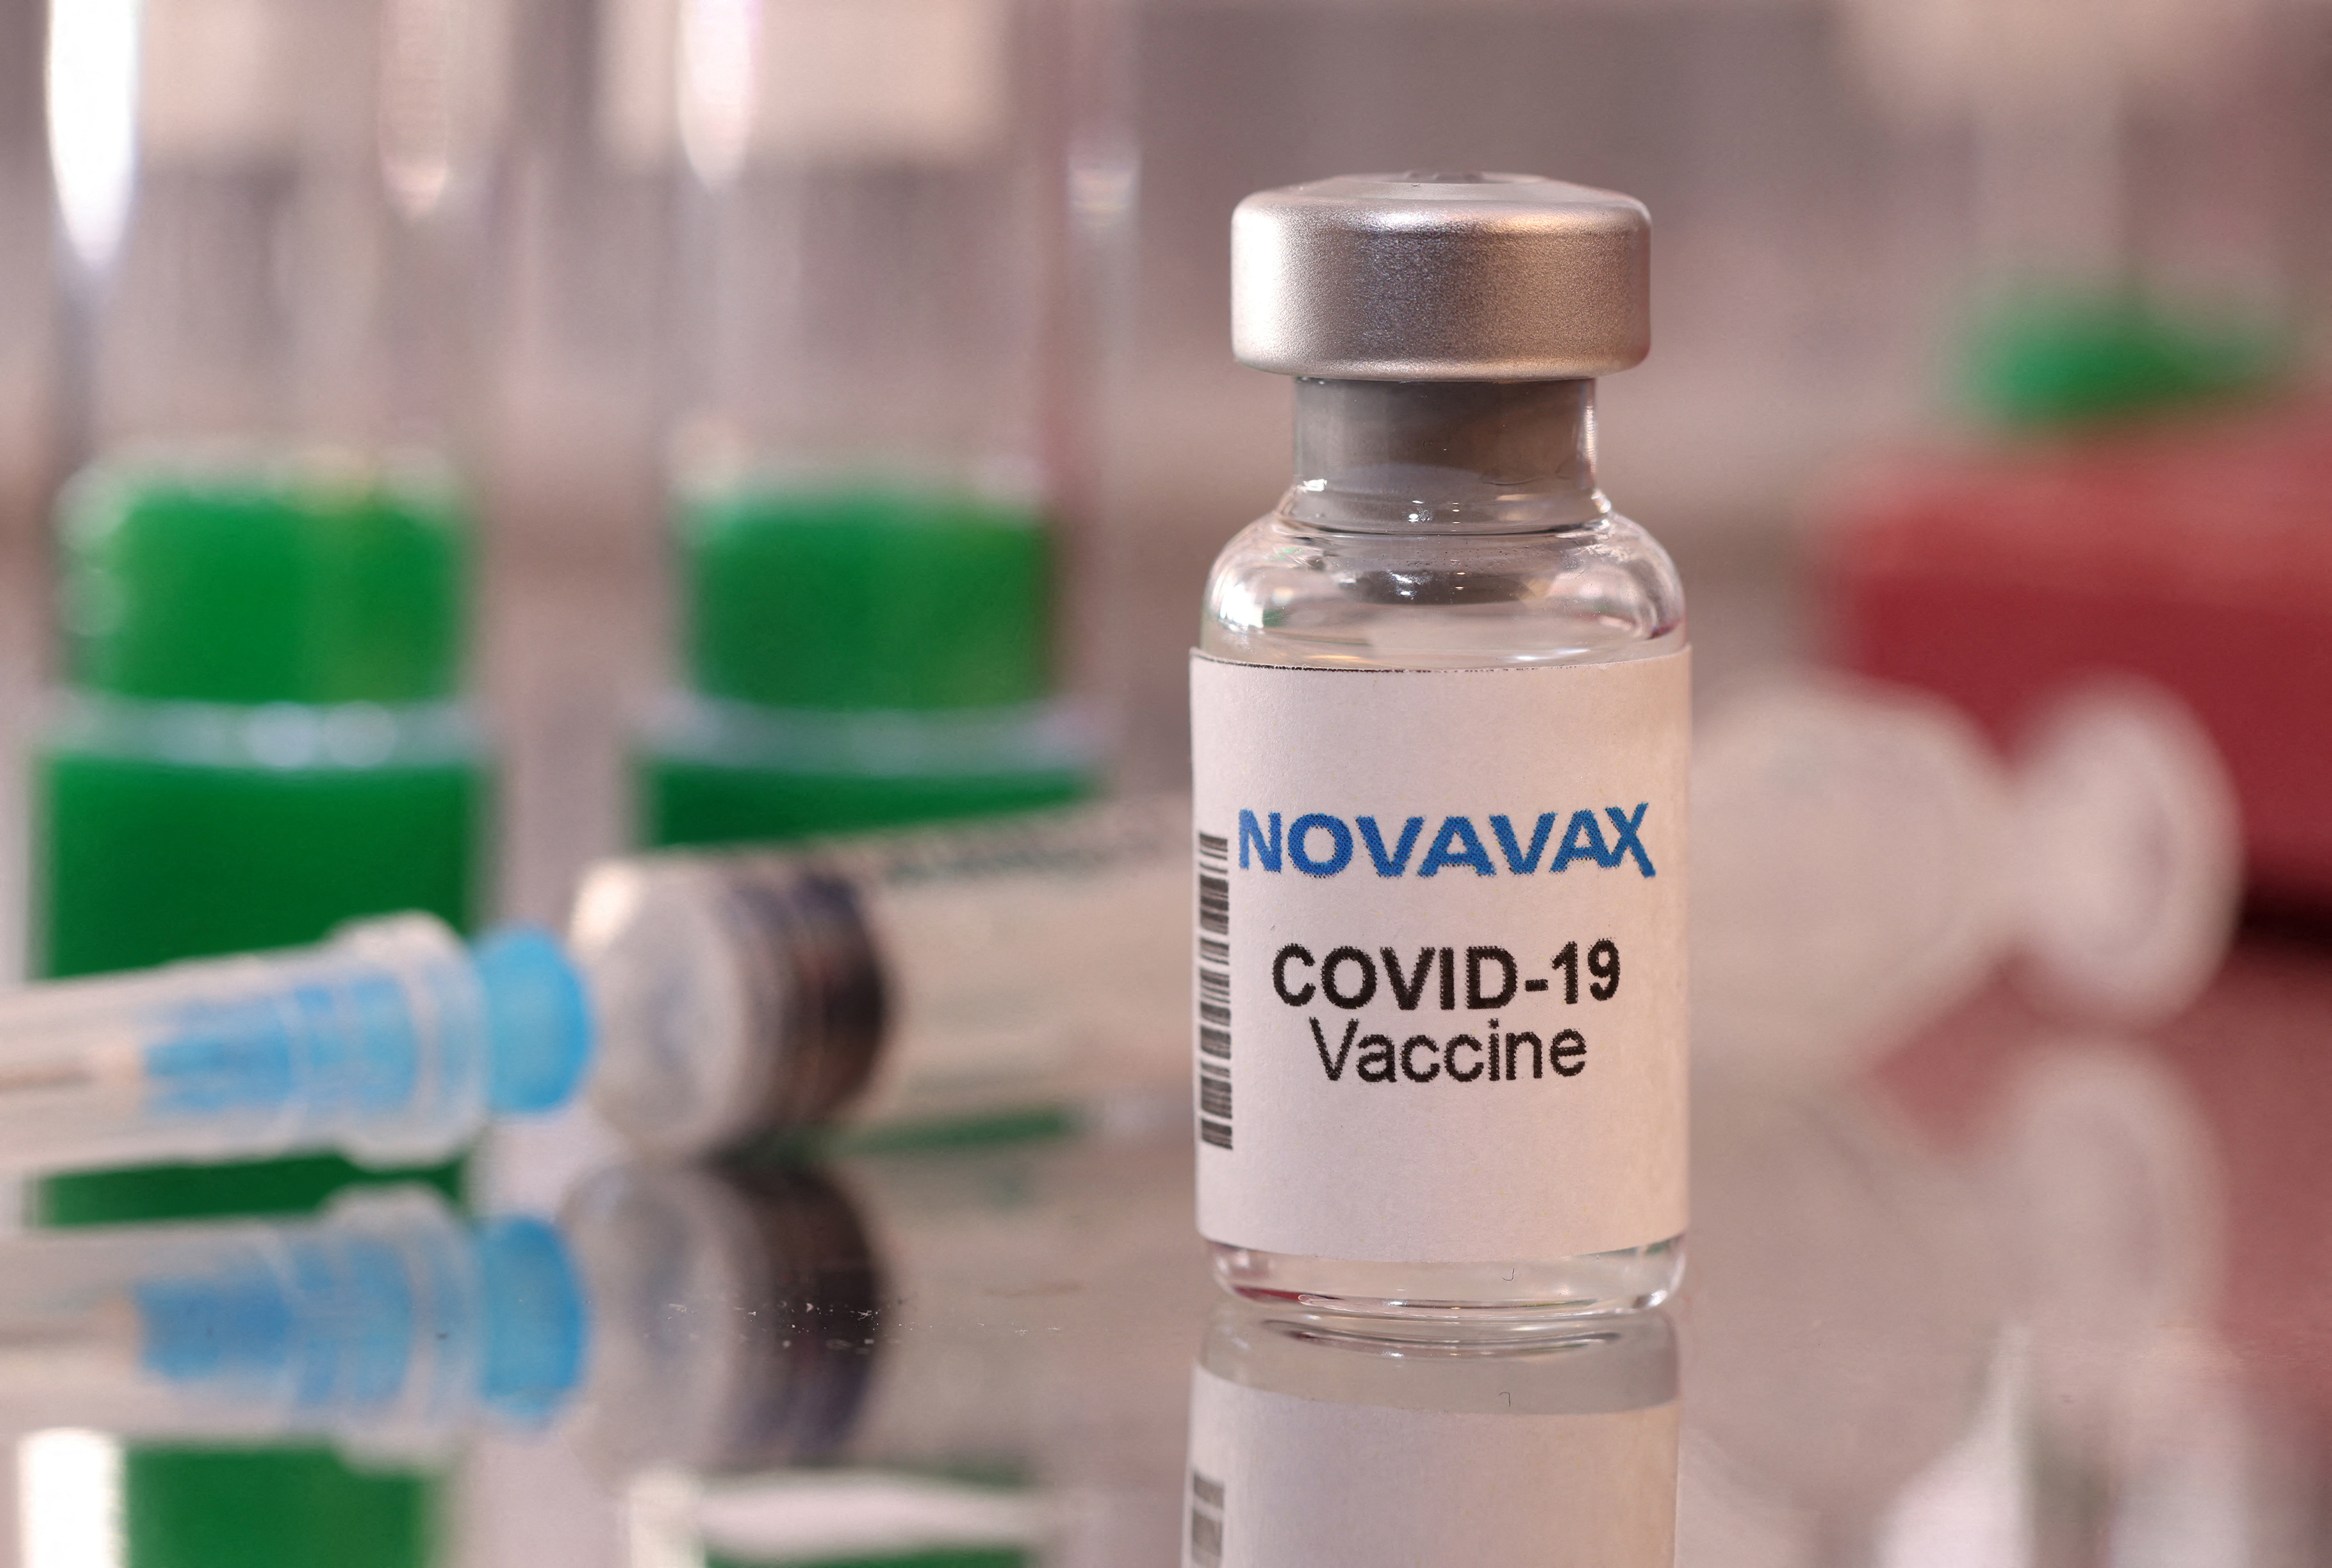 Israel signs deal with Novavax for COVID vaccine, health ministry says |  Reuters